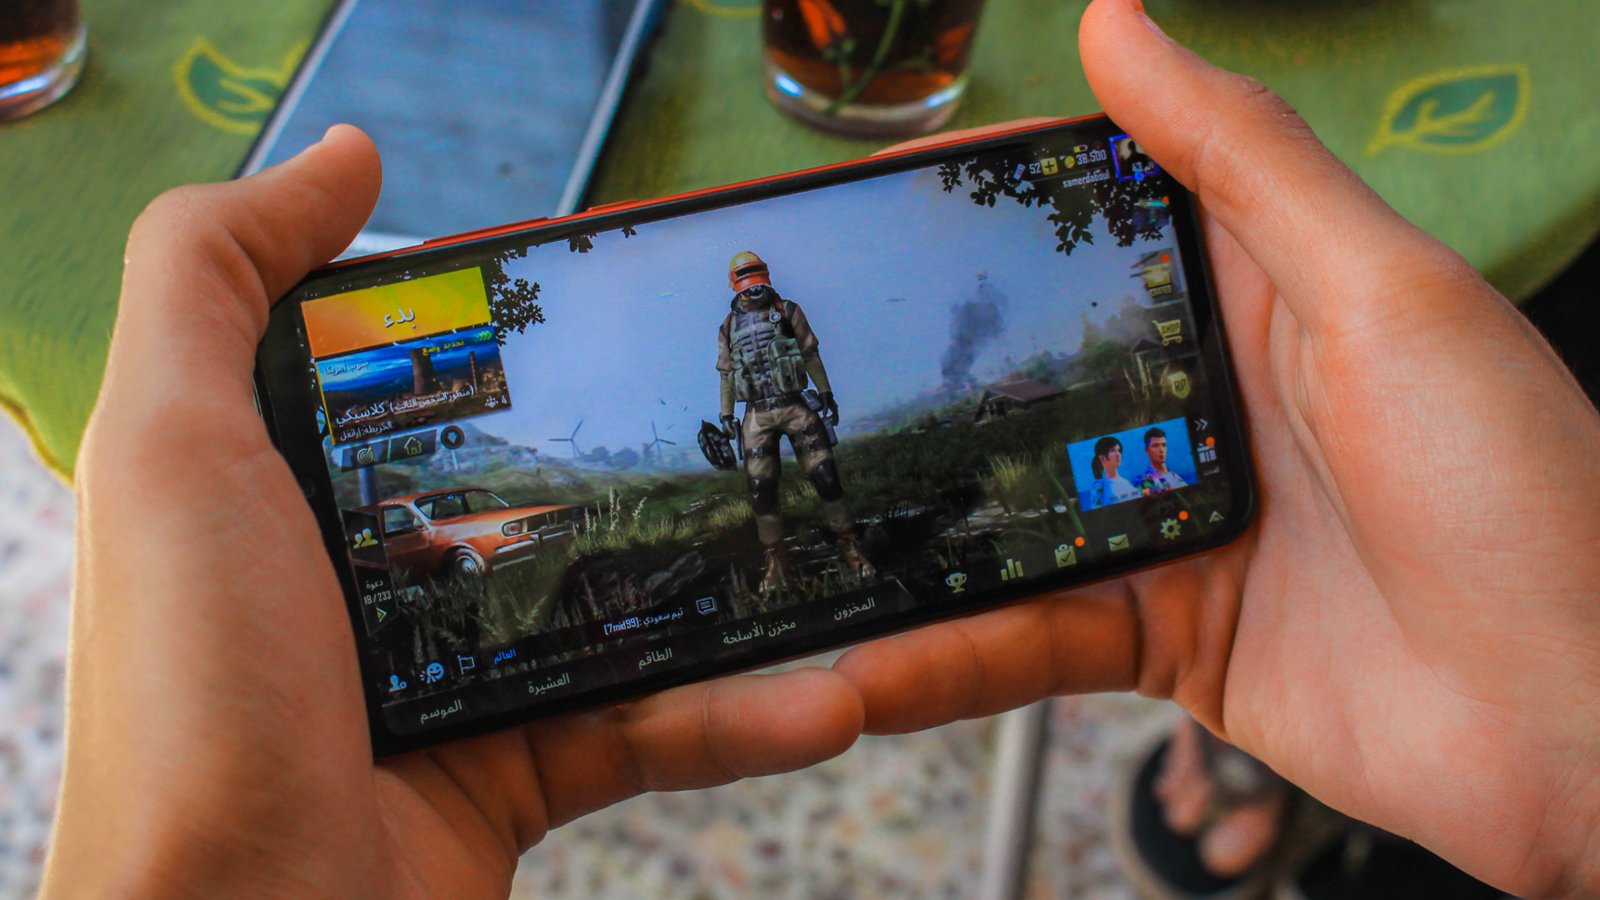 HOW TO STREAM MOBILE GAMES 